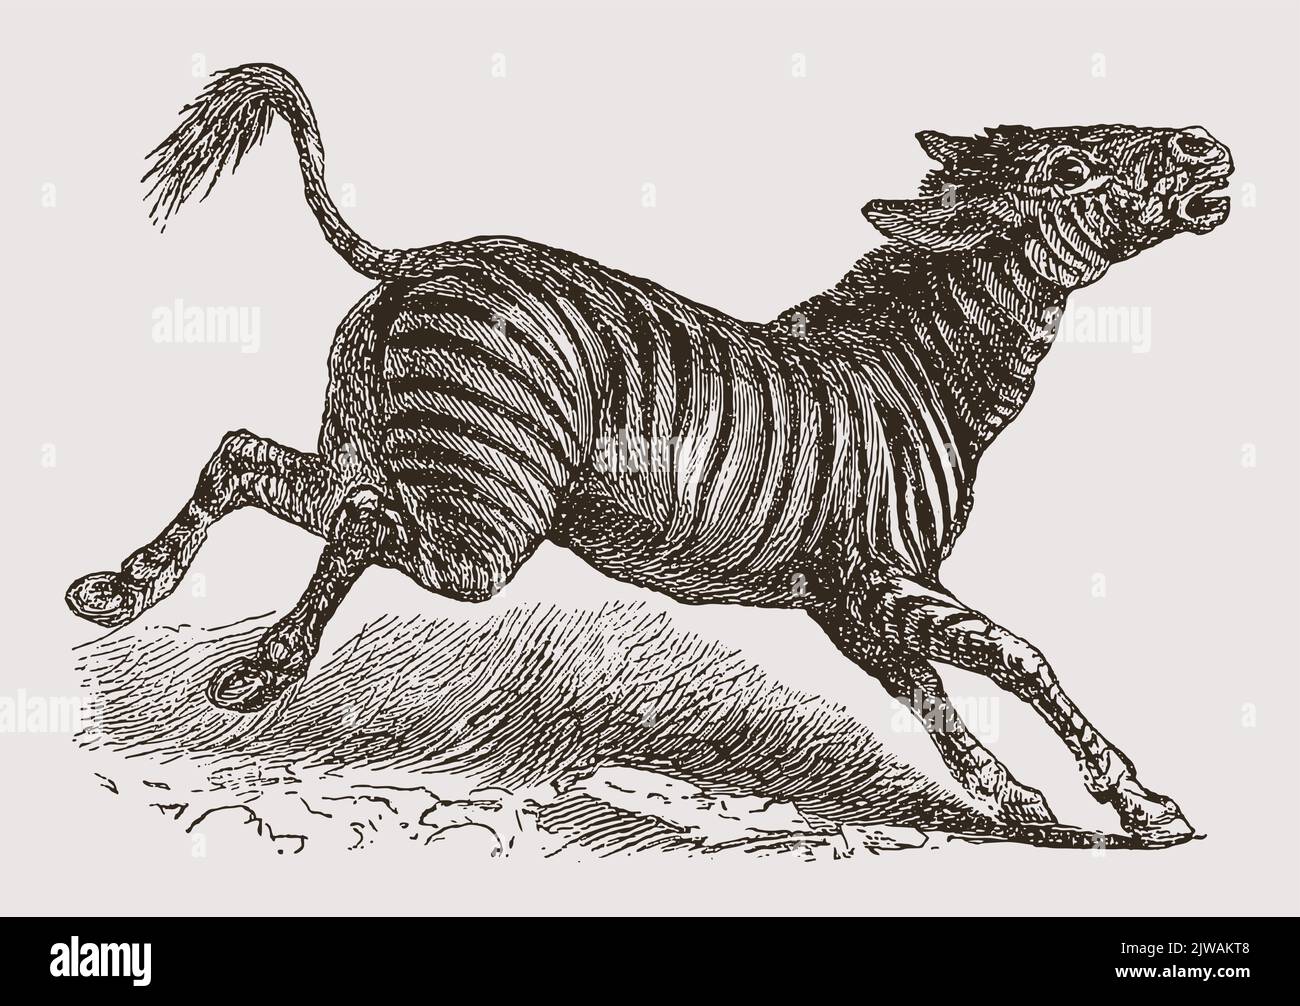 Jumping mountain zebra in side view. Illustration after antique engraving from 19th century Stock Vector